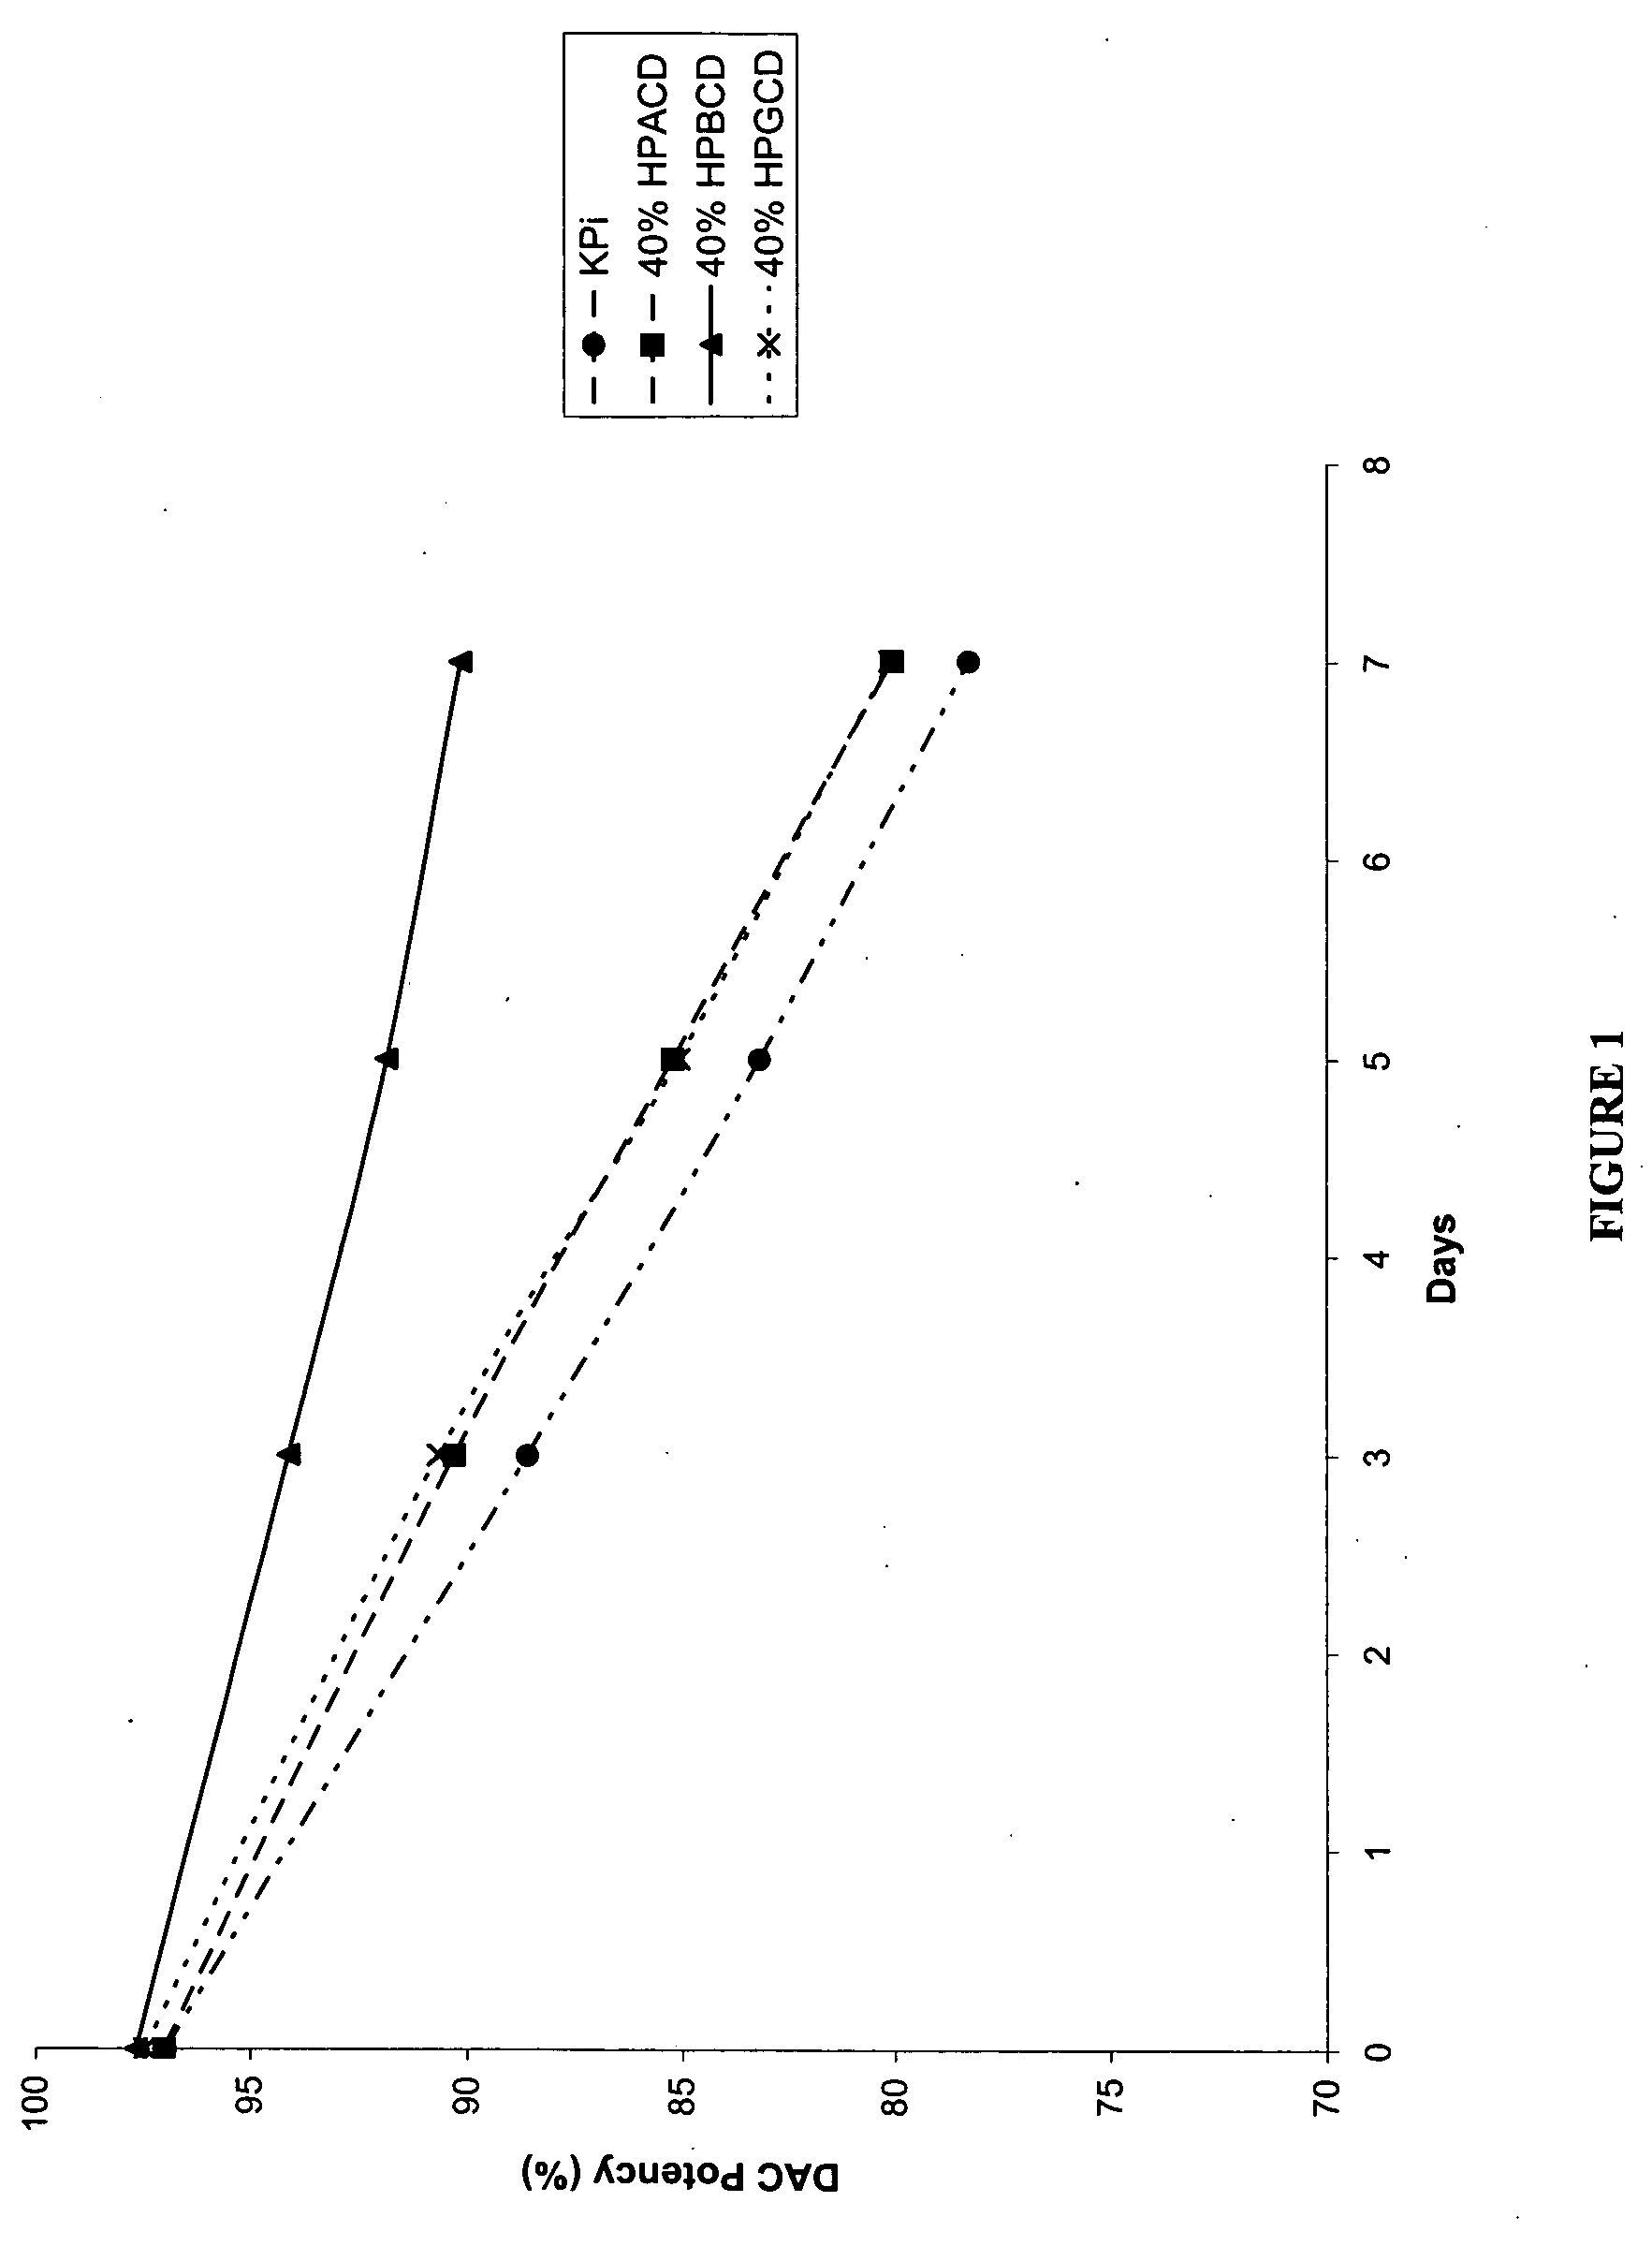 Pharmaceutical formulation of cytidine analogs and derivatives